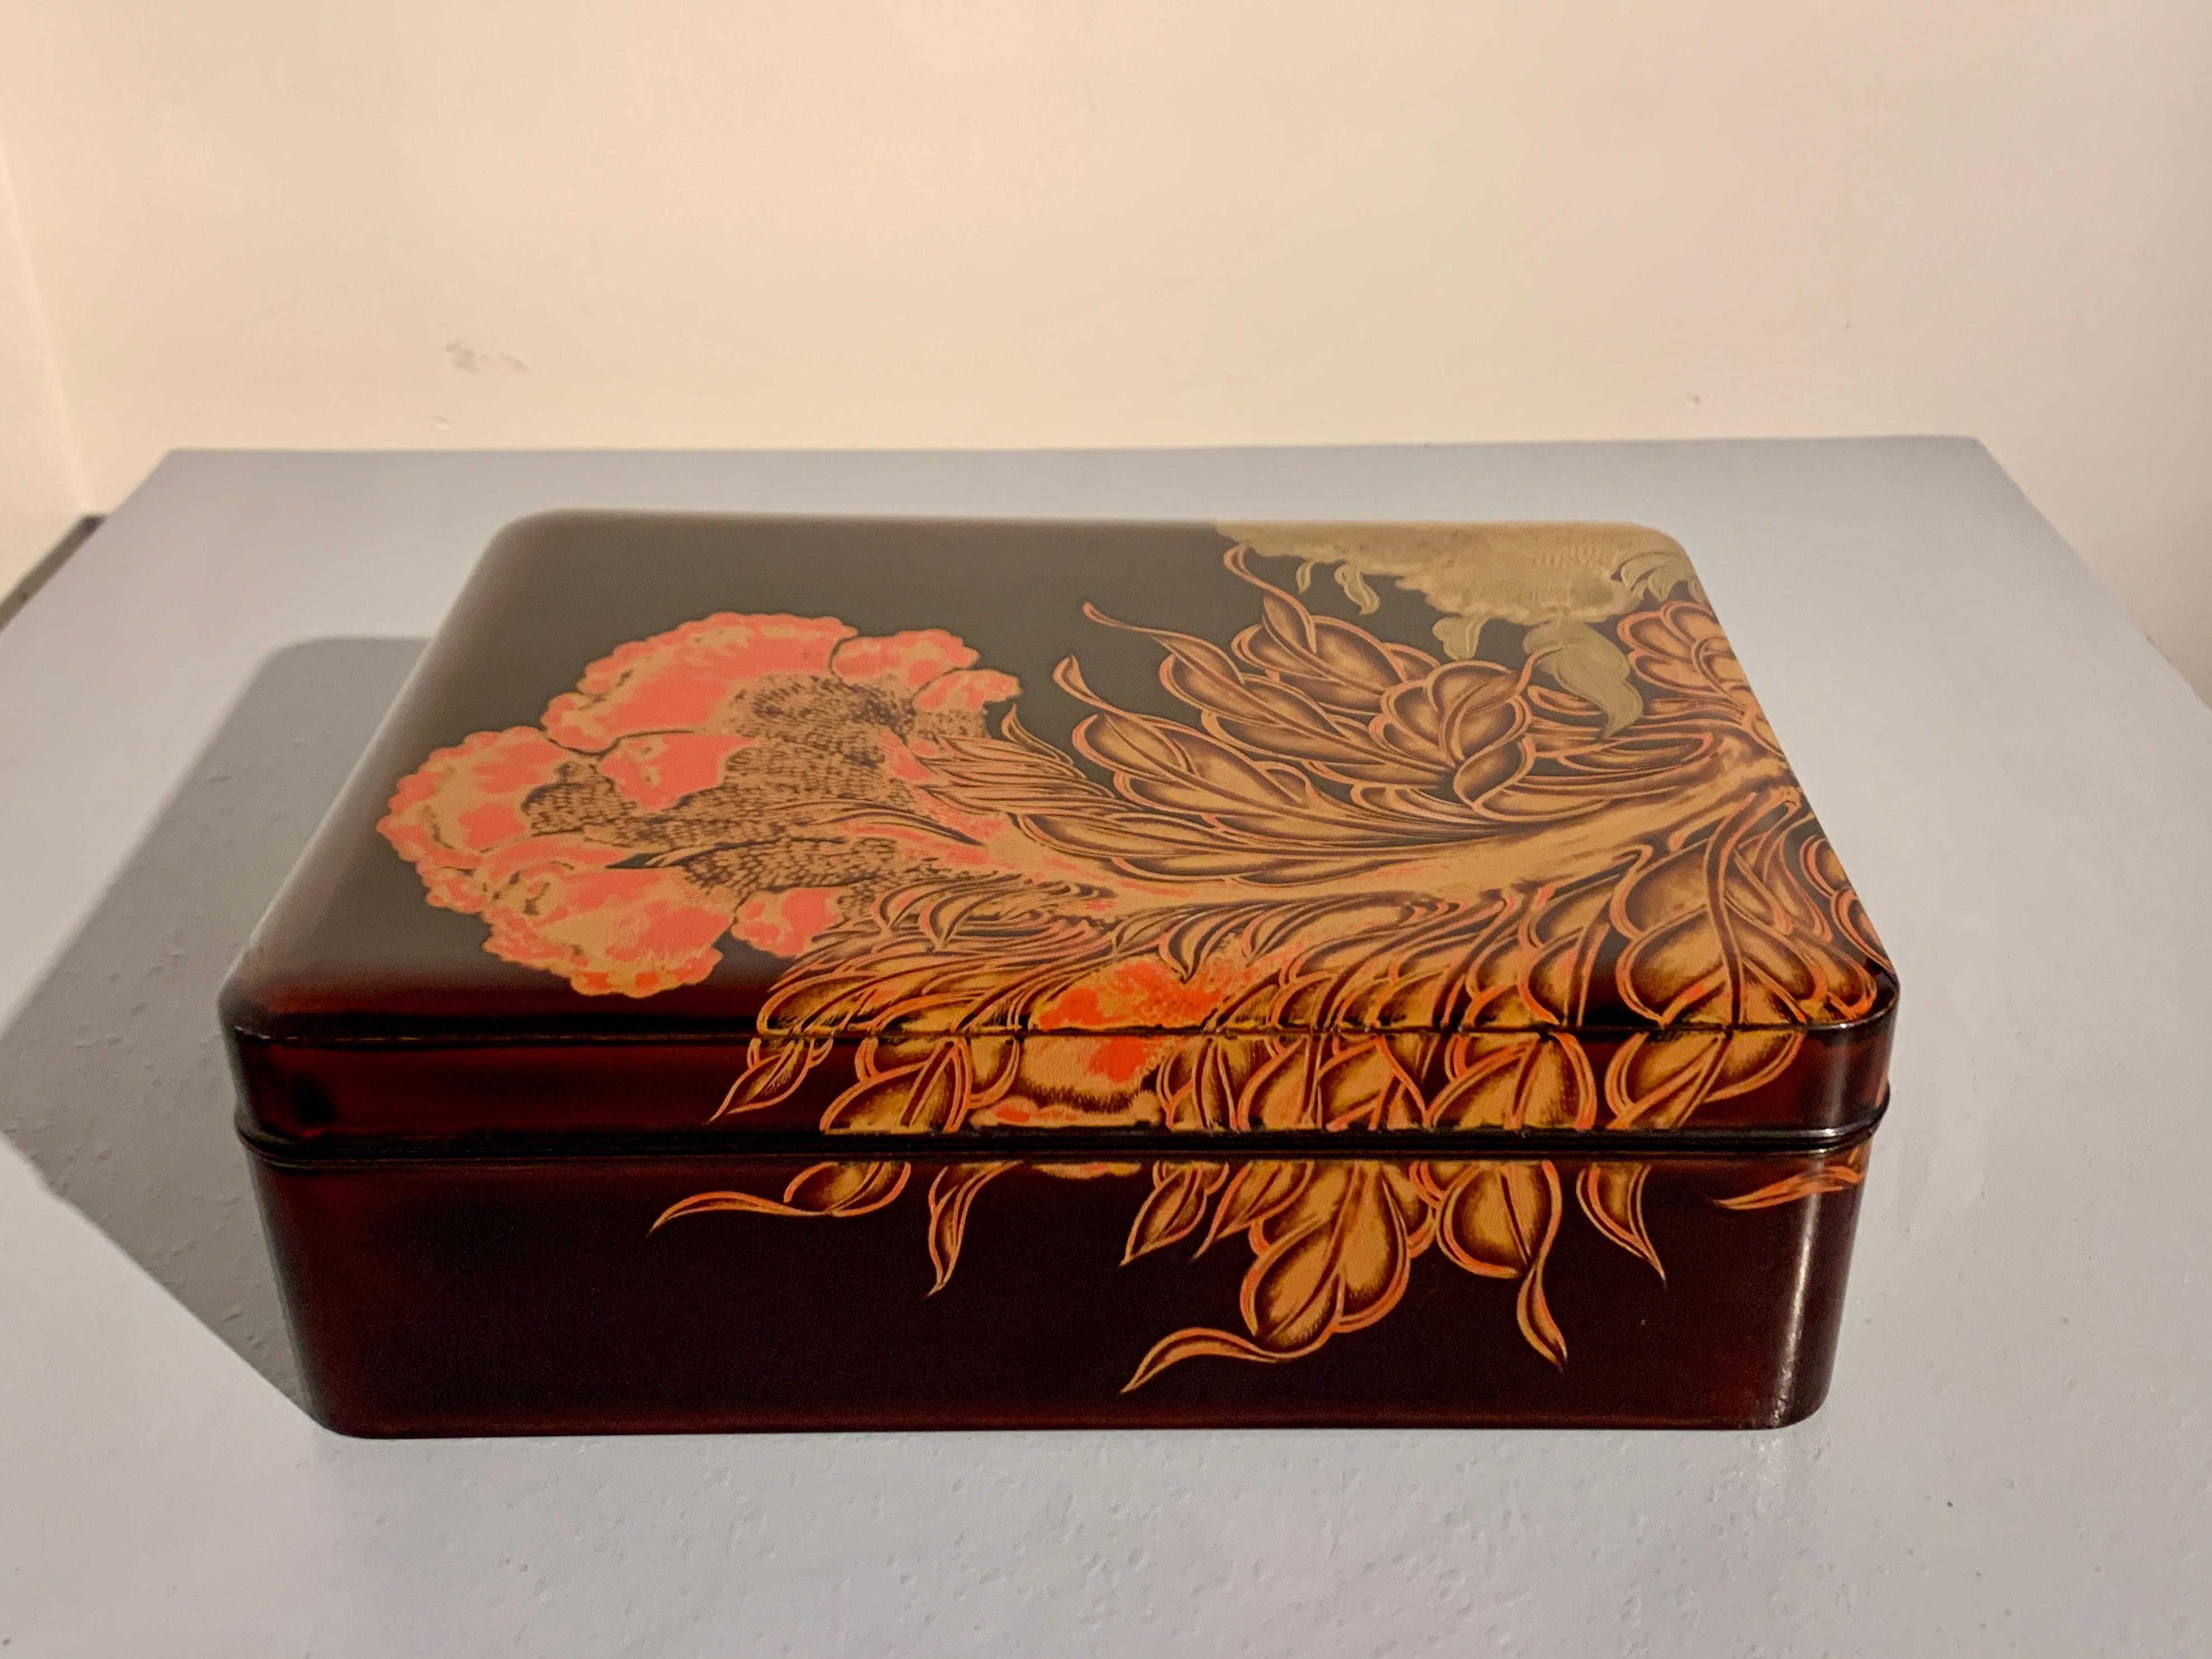 Large Vintage Japanese Lacquer Document Box, Ryoshibako, Showa Period, Japan In Fair Condition For Sale In Austin, TX